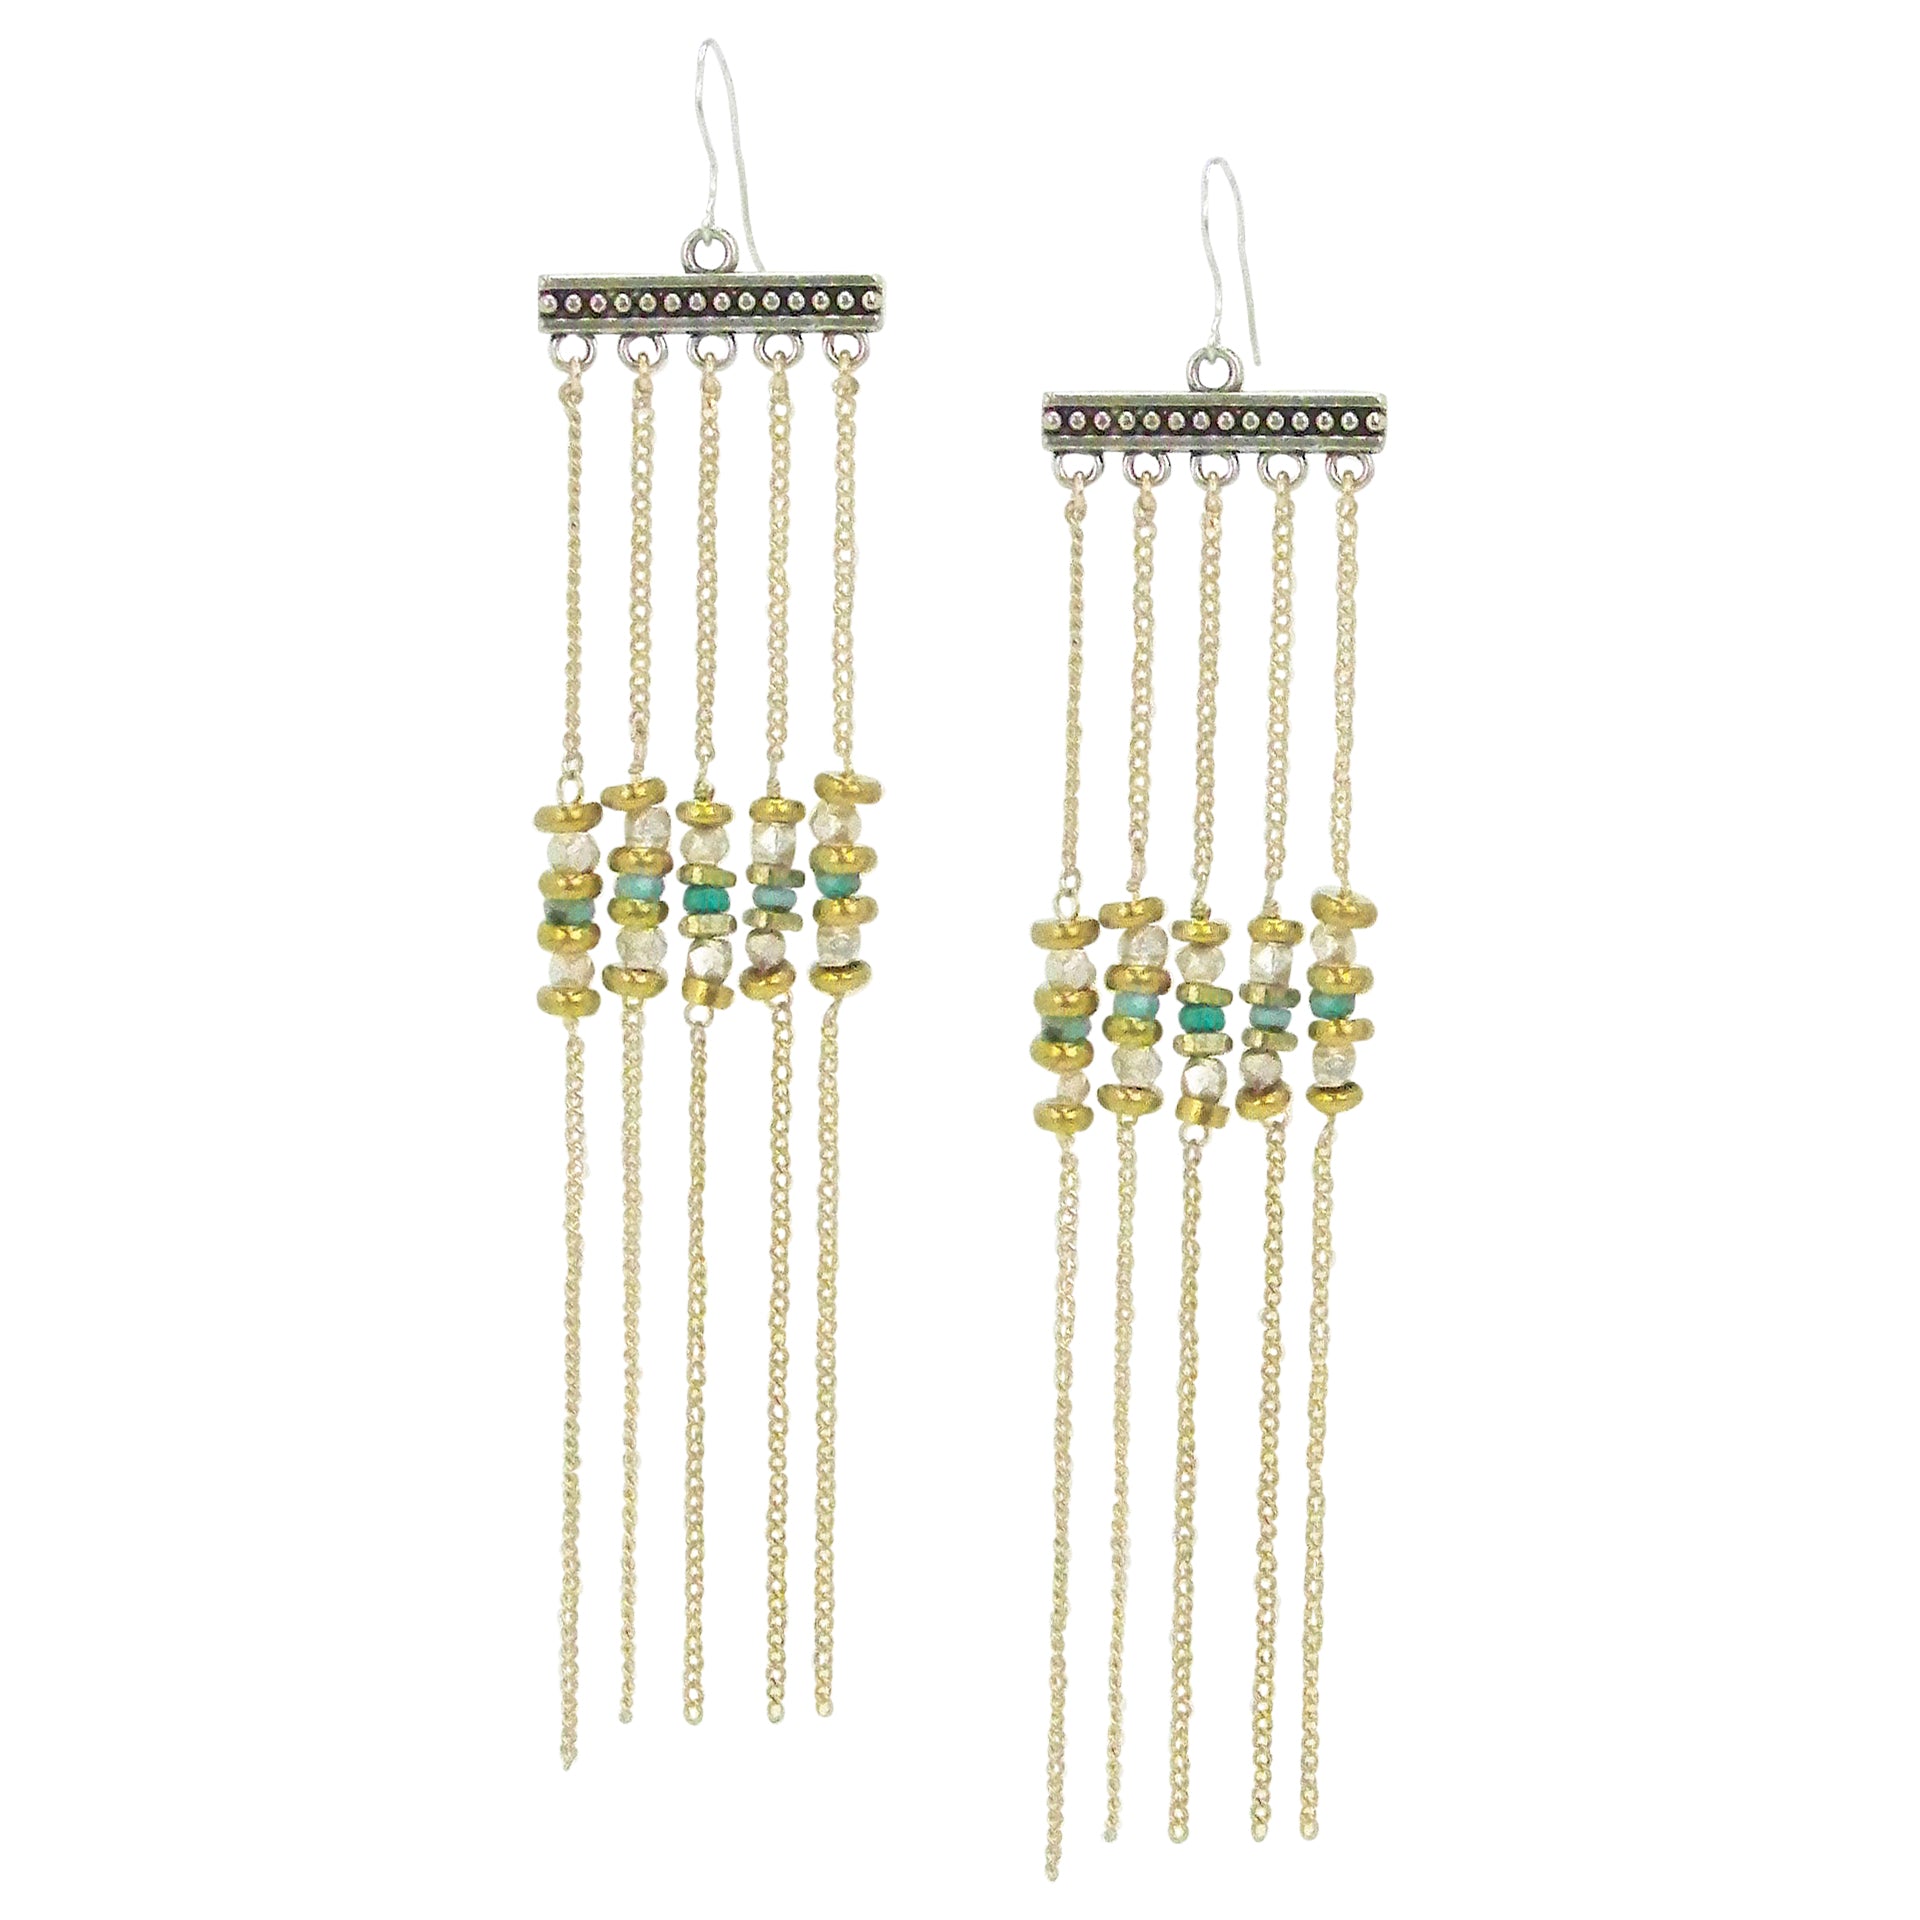 Yunis K Eden Gold and Silver Earrings with Fringe and Turquoise Beads